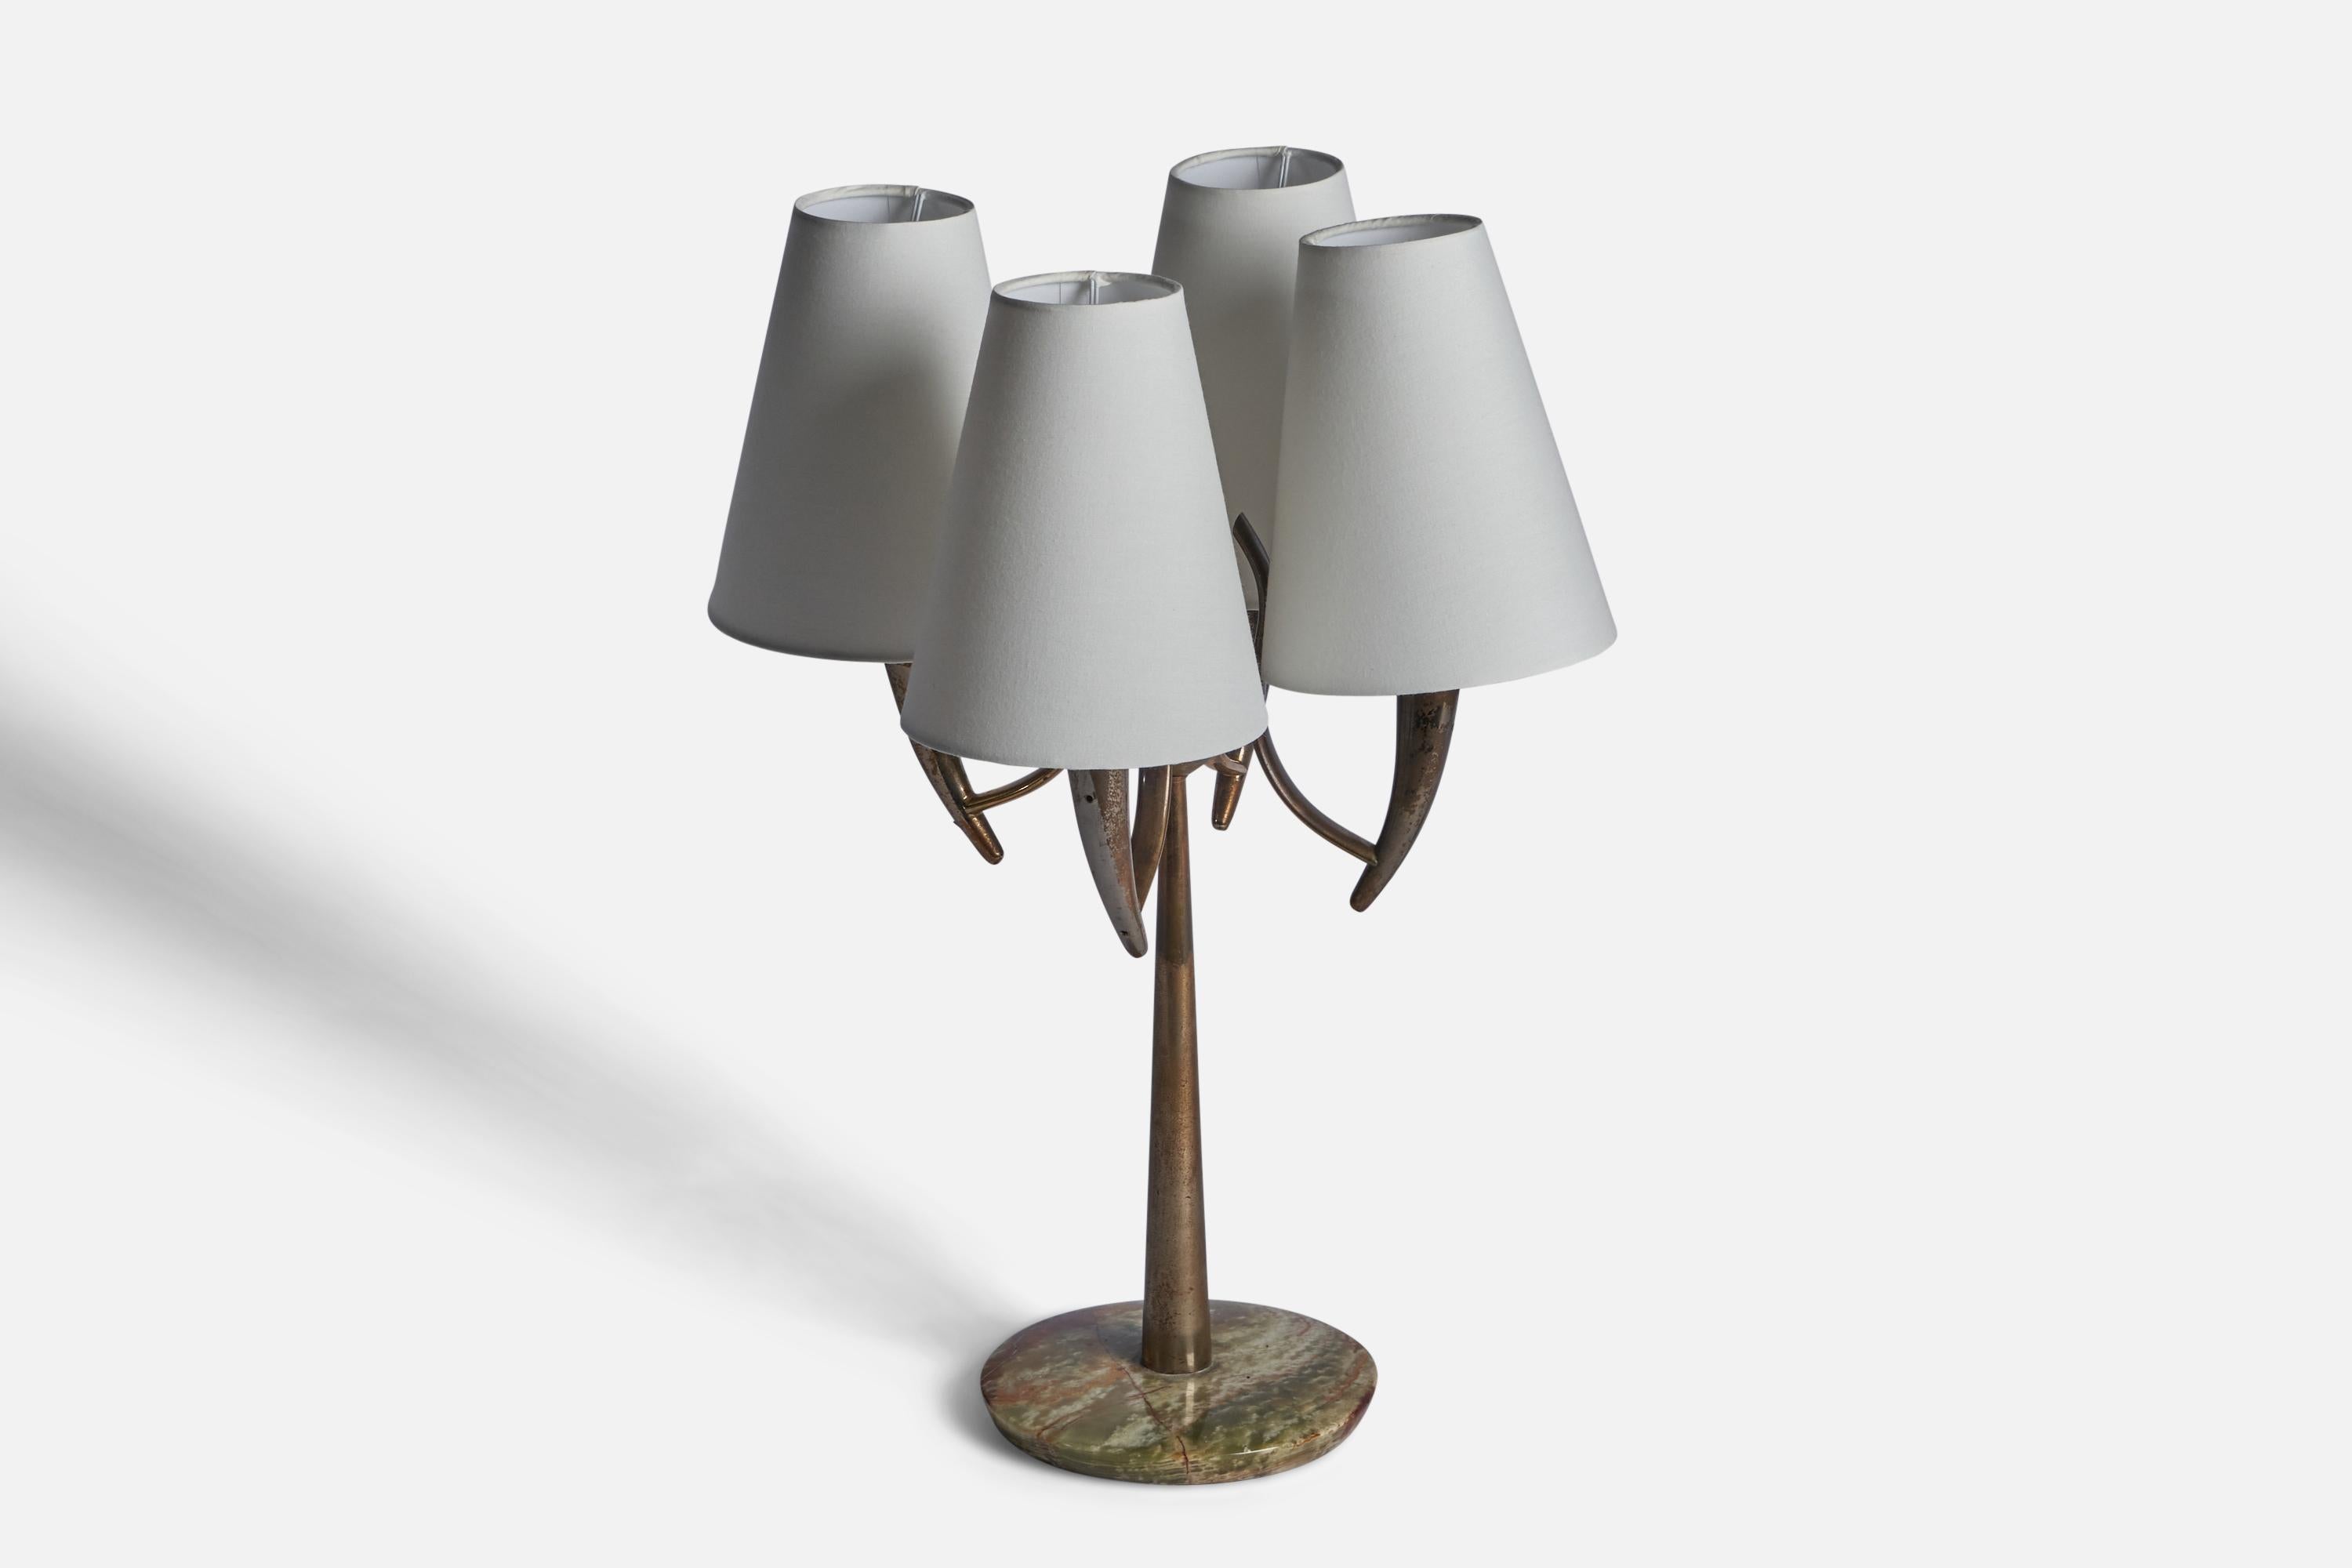 A four-armed brass, marble and white fabric table lamp designed and produced in Italy, c. 1940s.

Dimensions of Lamp (inches): 14.5” H x 10.5” Diameter Dimensions of Shade (inches): 2.75” Top Diameter x 5.5” Bottom Diameter x 6.75” H Dimensions of